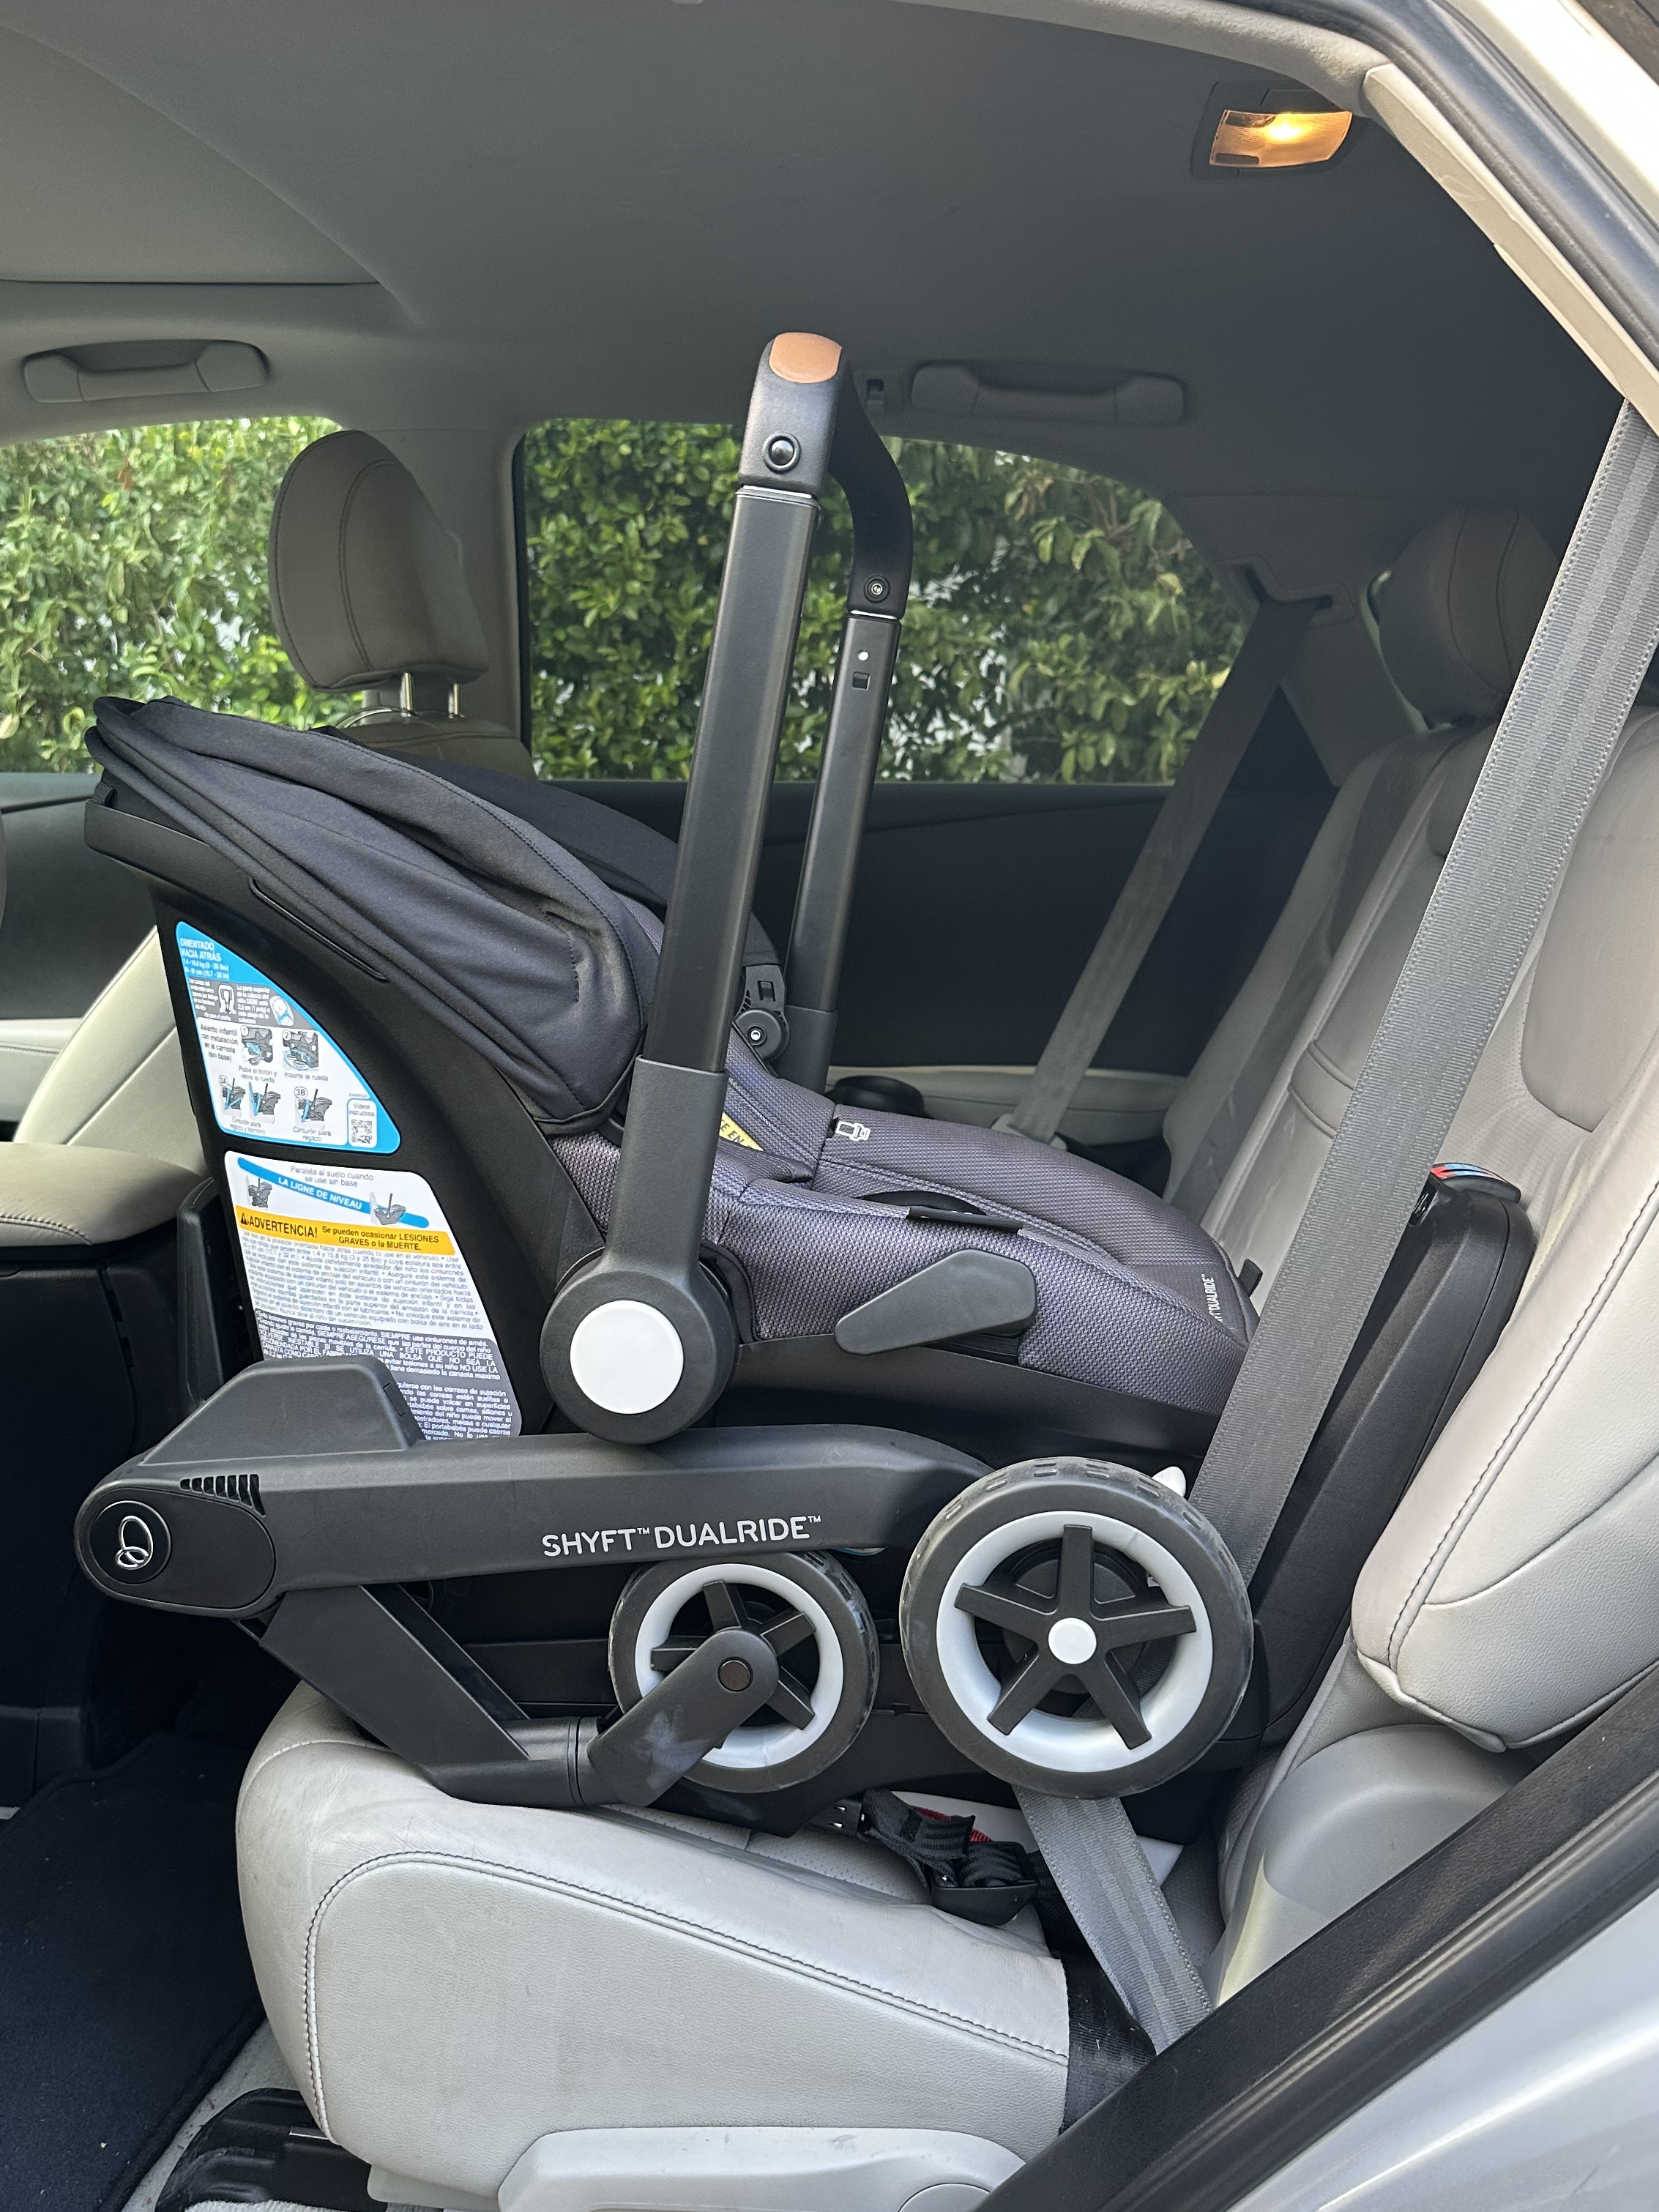 Evenflo Shyft DualRide Car Seat Review | Installed using the base with vehicle seat belt